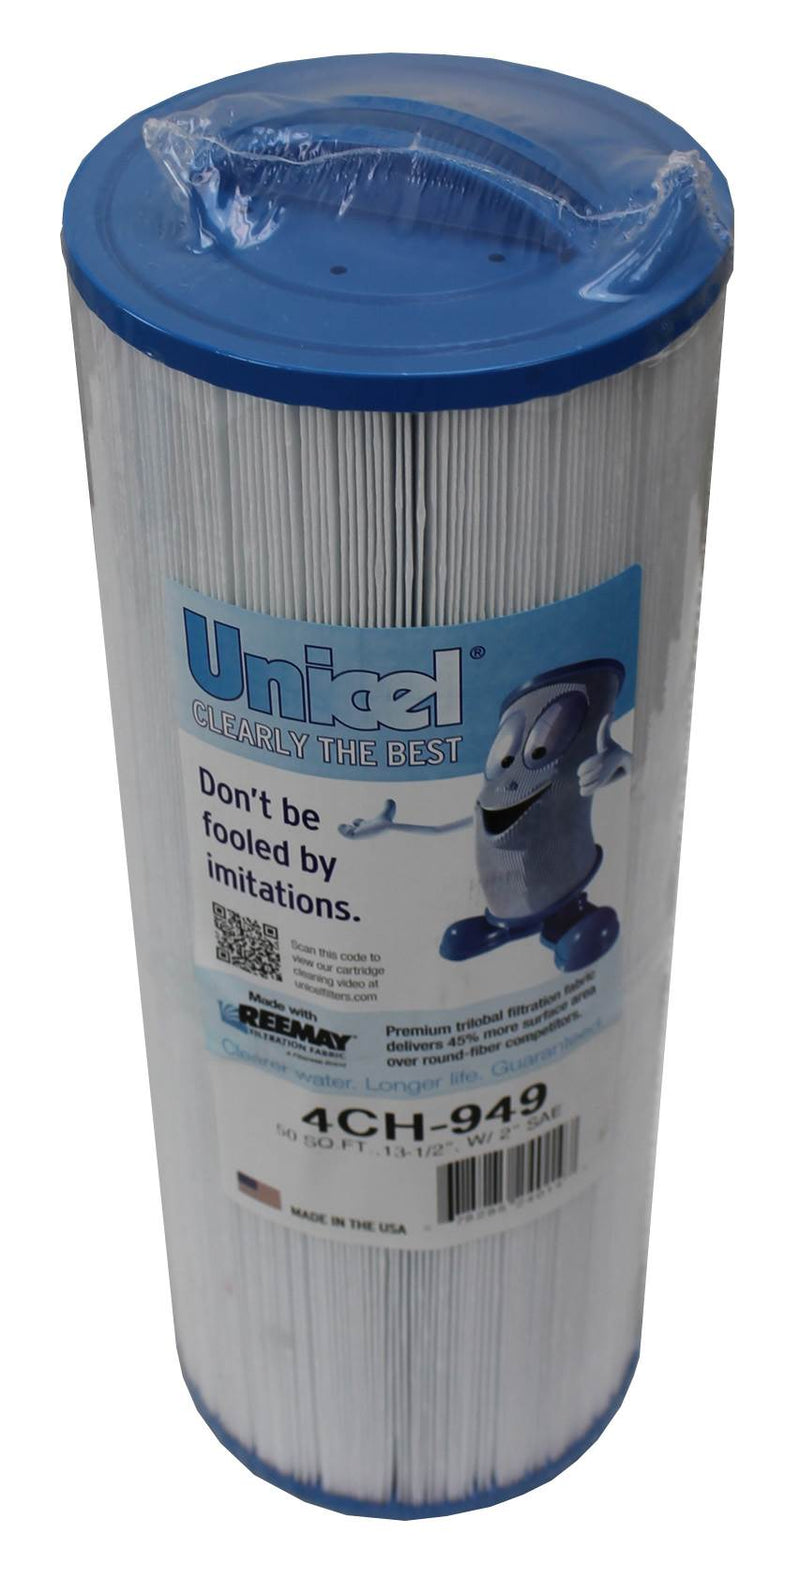 Unicel 4CH-949 Replacement 50 Sq Ft Filter Cartridge for Hot Tub Spa, 210 Pleats